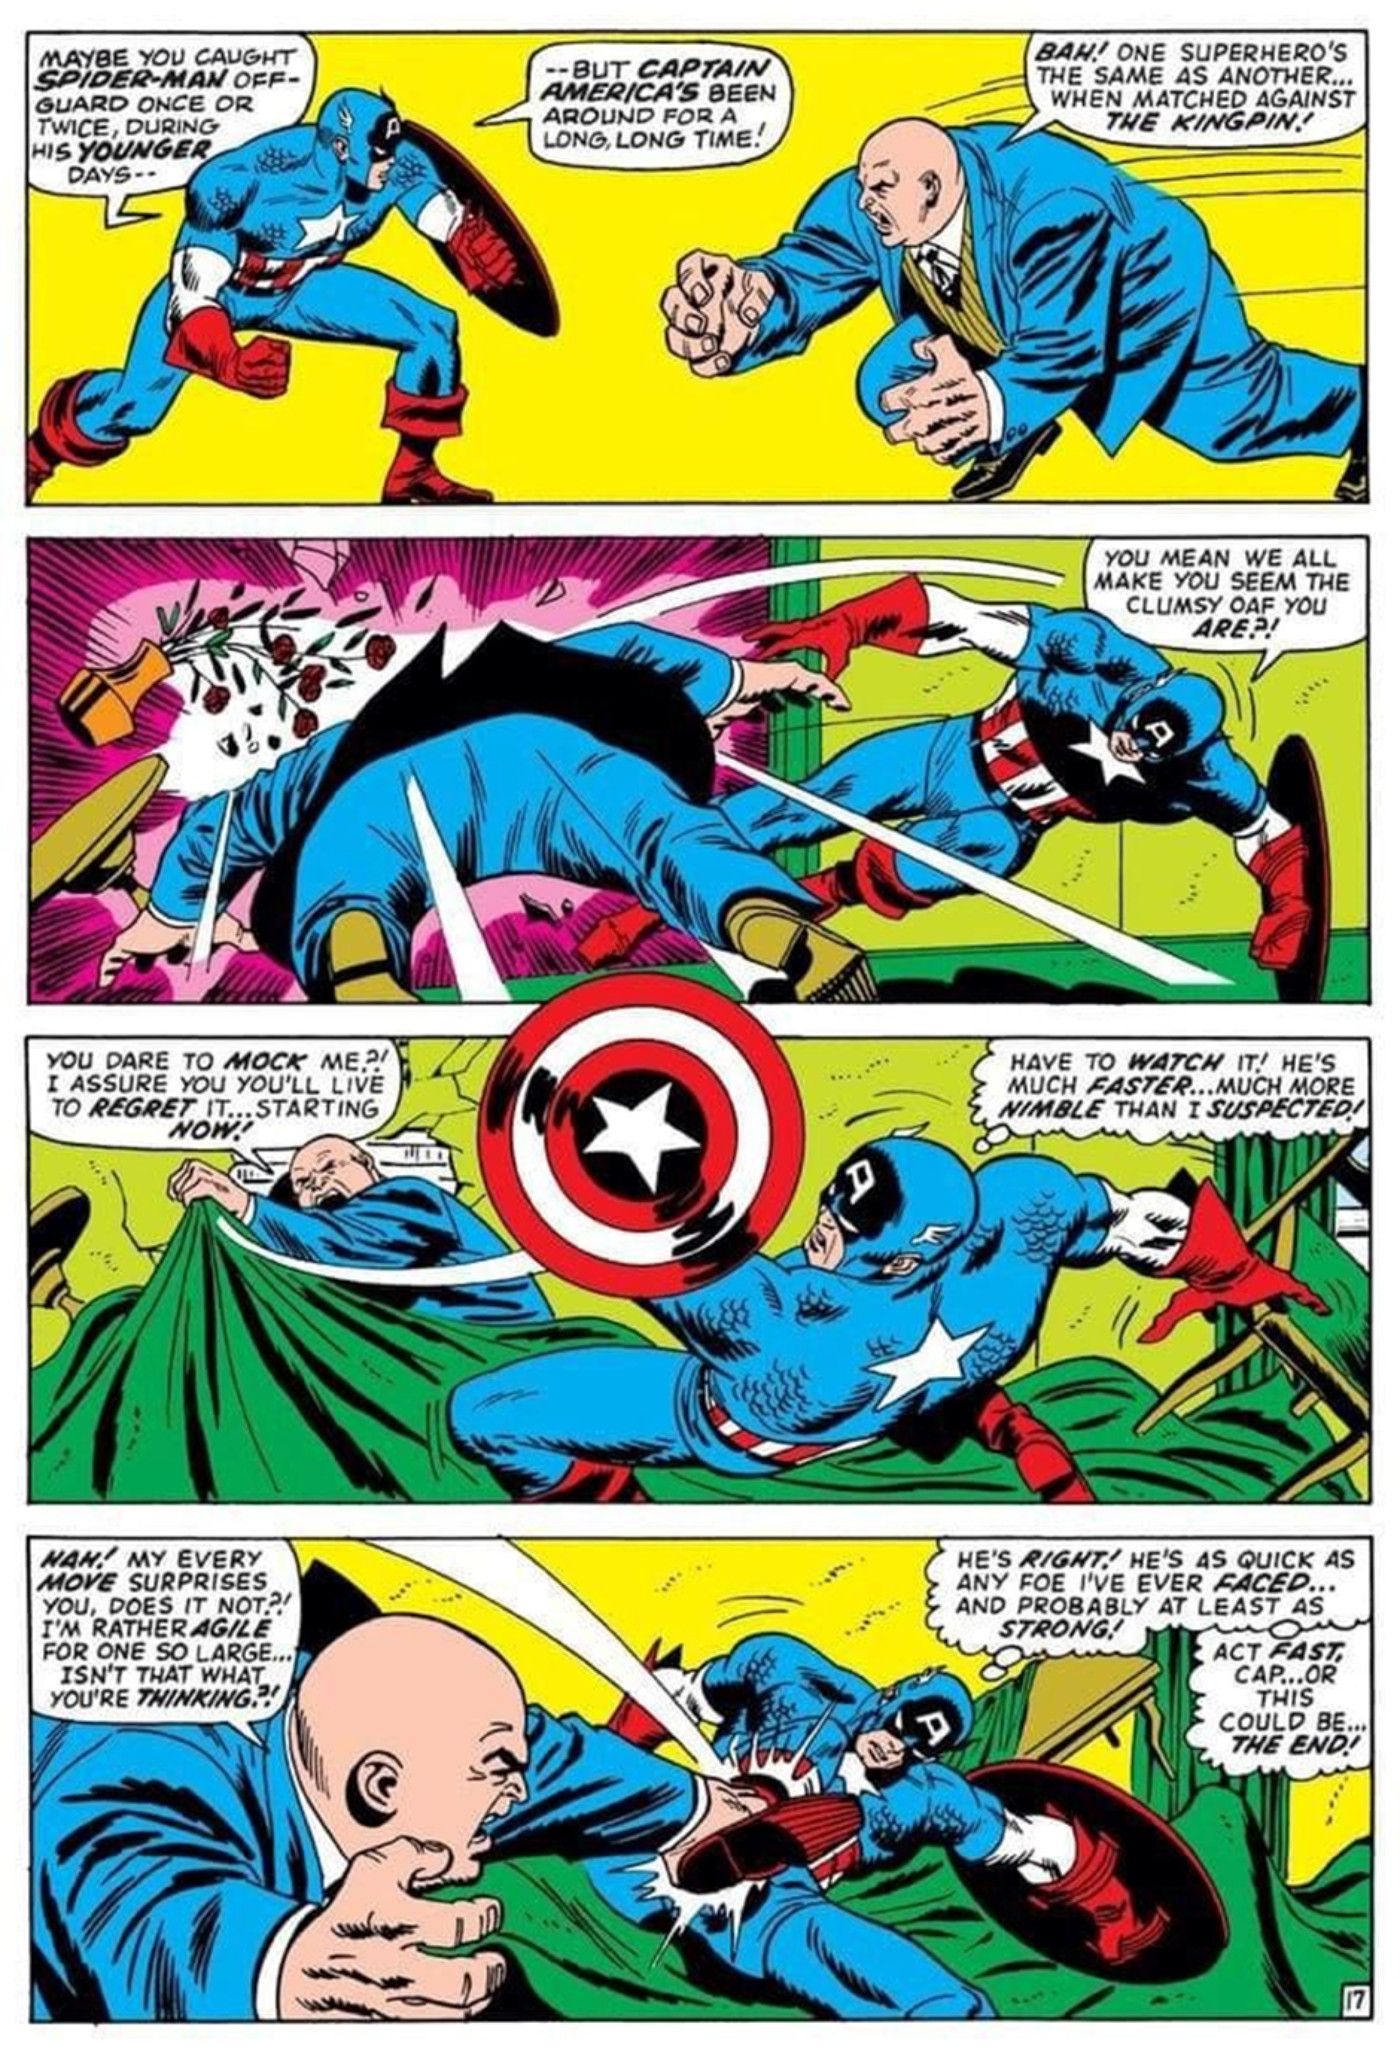 Captain America Kingpin Best Fighter CA #147 page excerpt